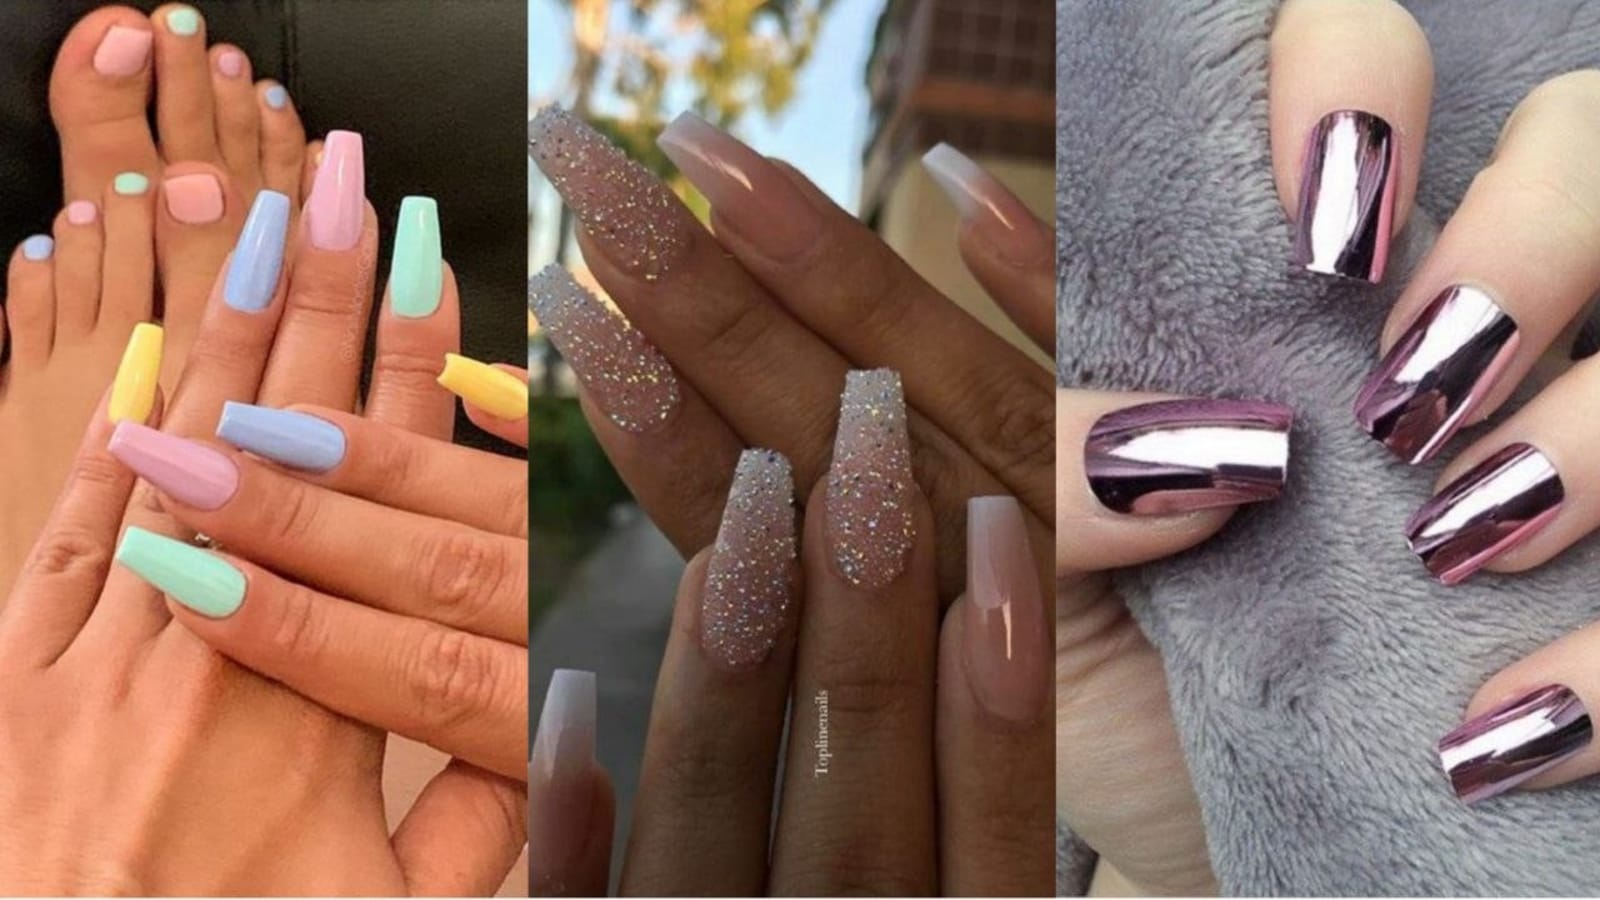 The 11 Nail Trends That Will Be Everywhere According to Experts